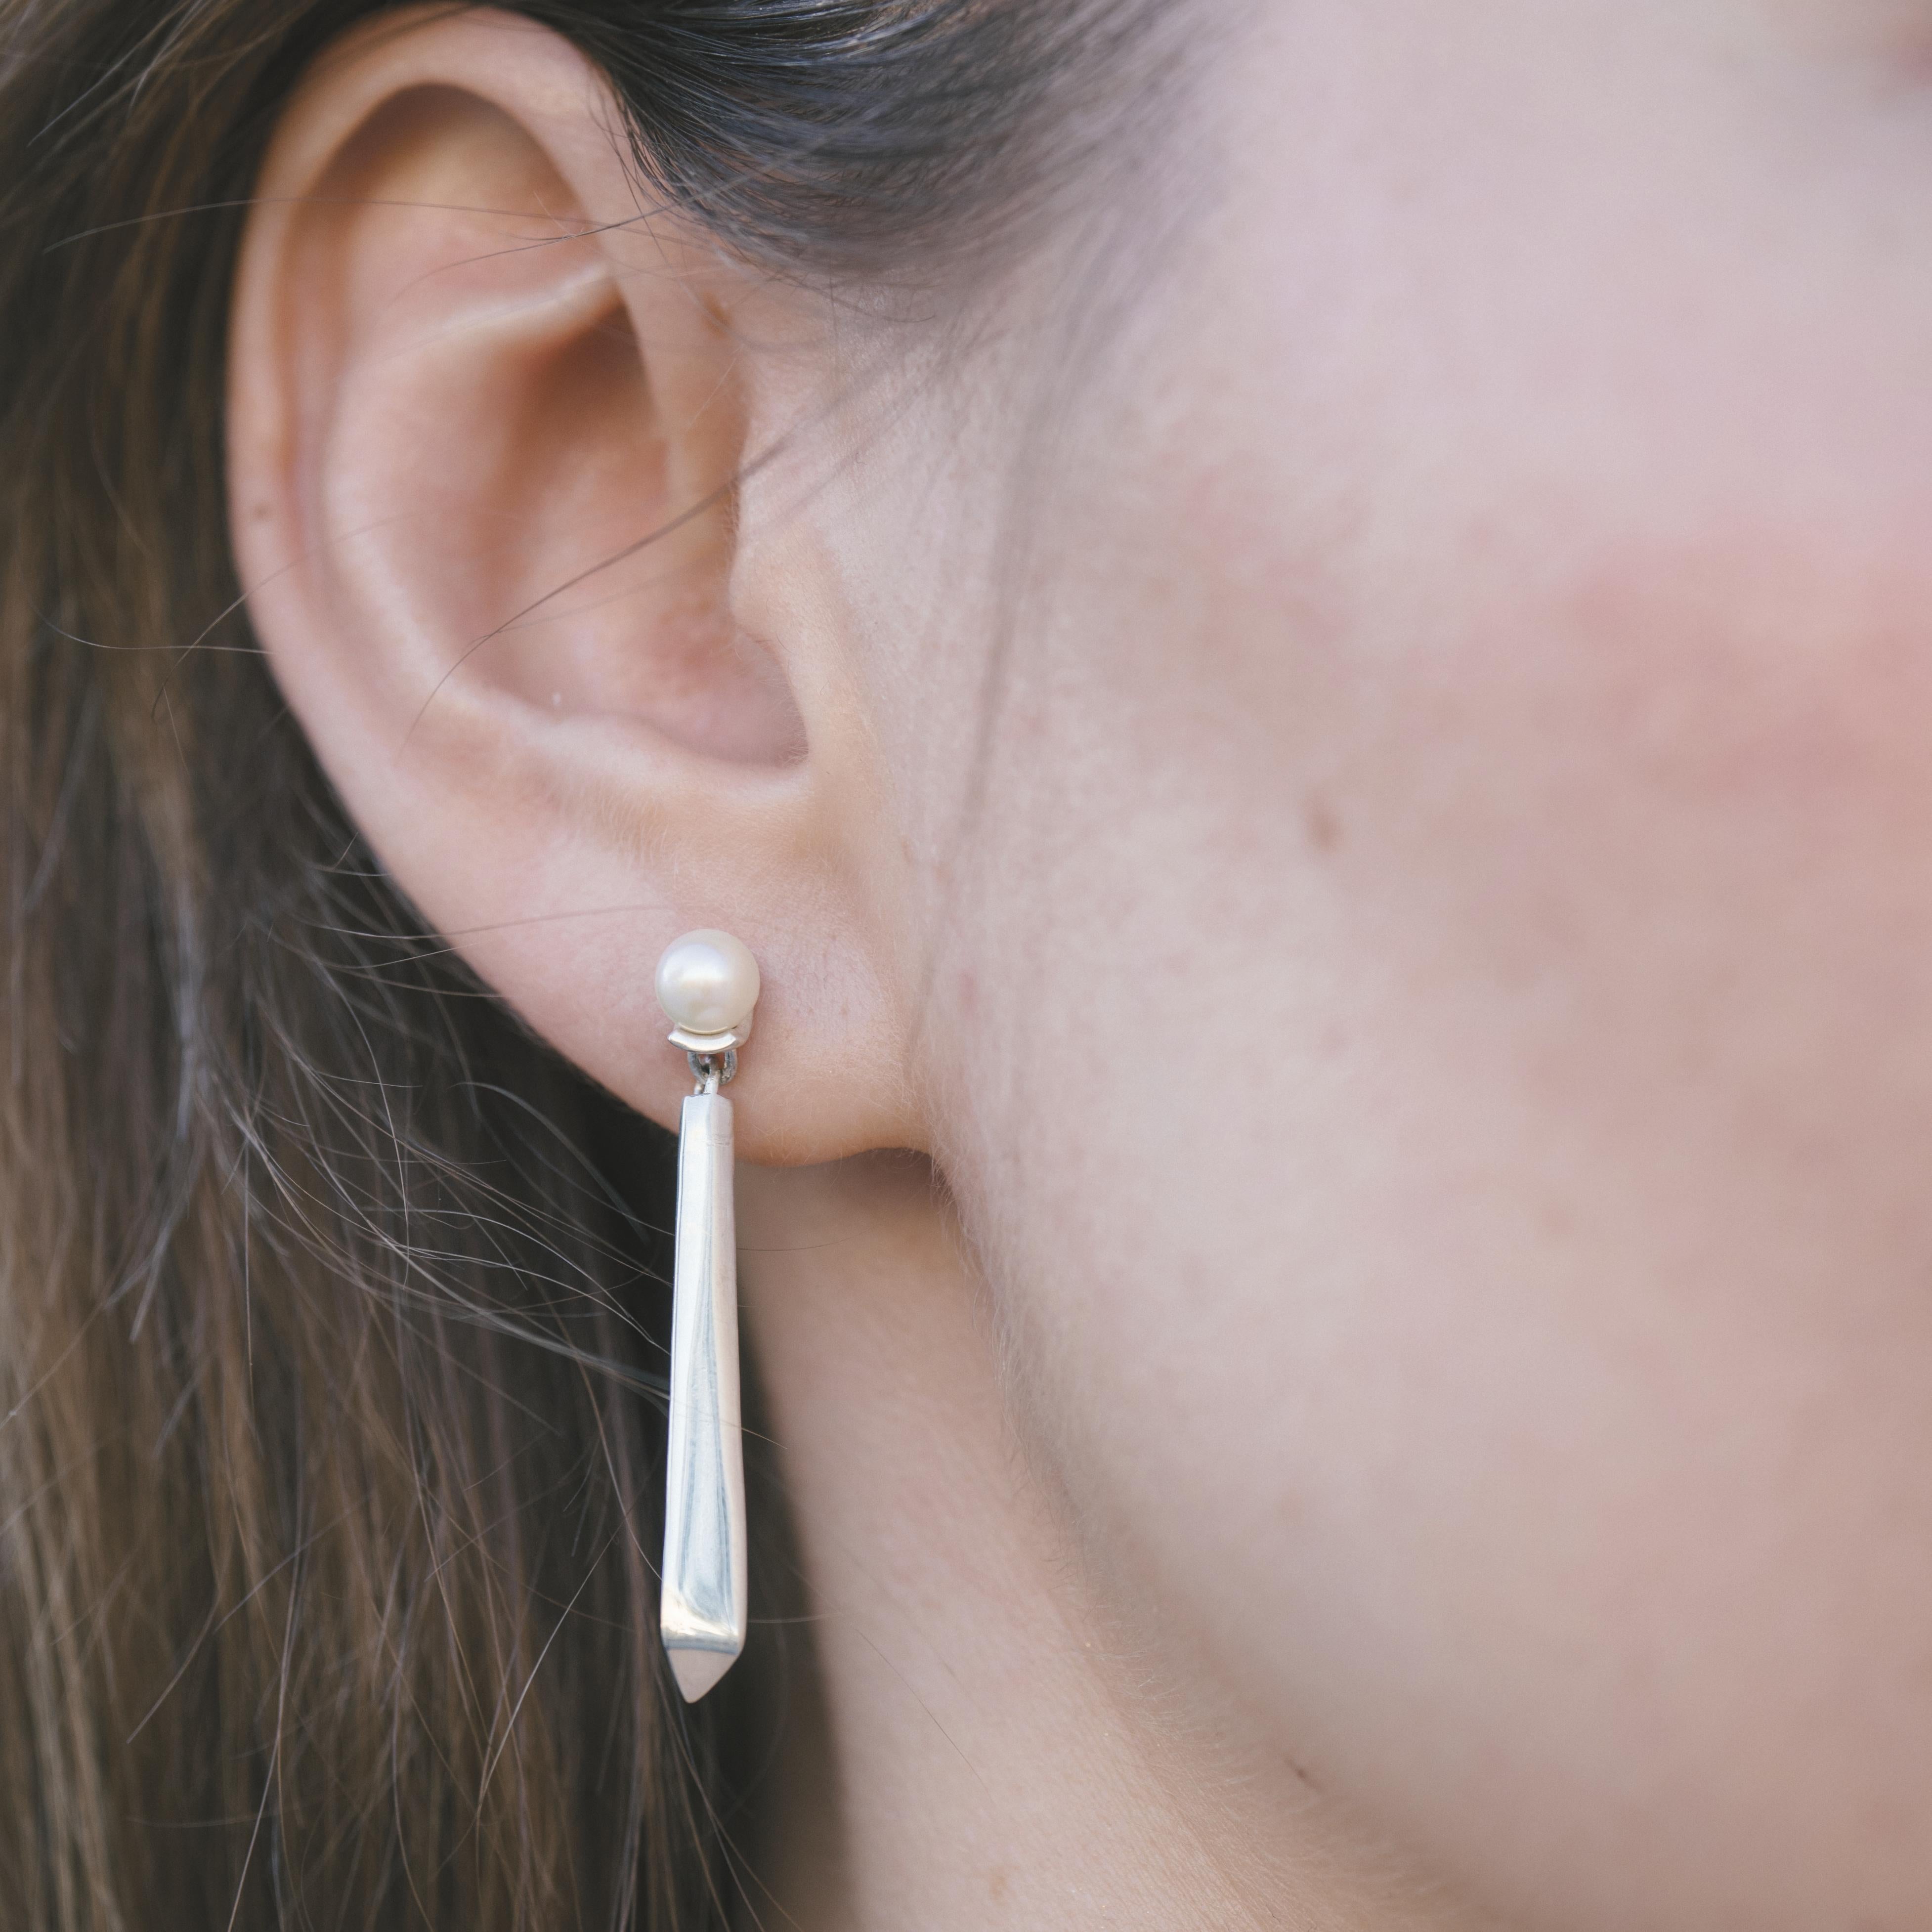 The Vis Viva Drop Earring is an evolving modern statement. Akoya pearls are the heart of these earrings, offering lustrous opalescent reflections in the light. Meaning “Living Force” in Latin, the Vis Viva Drop Earring flows from a circle to